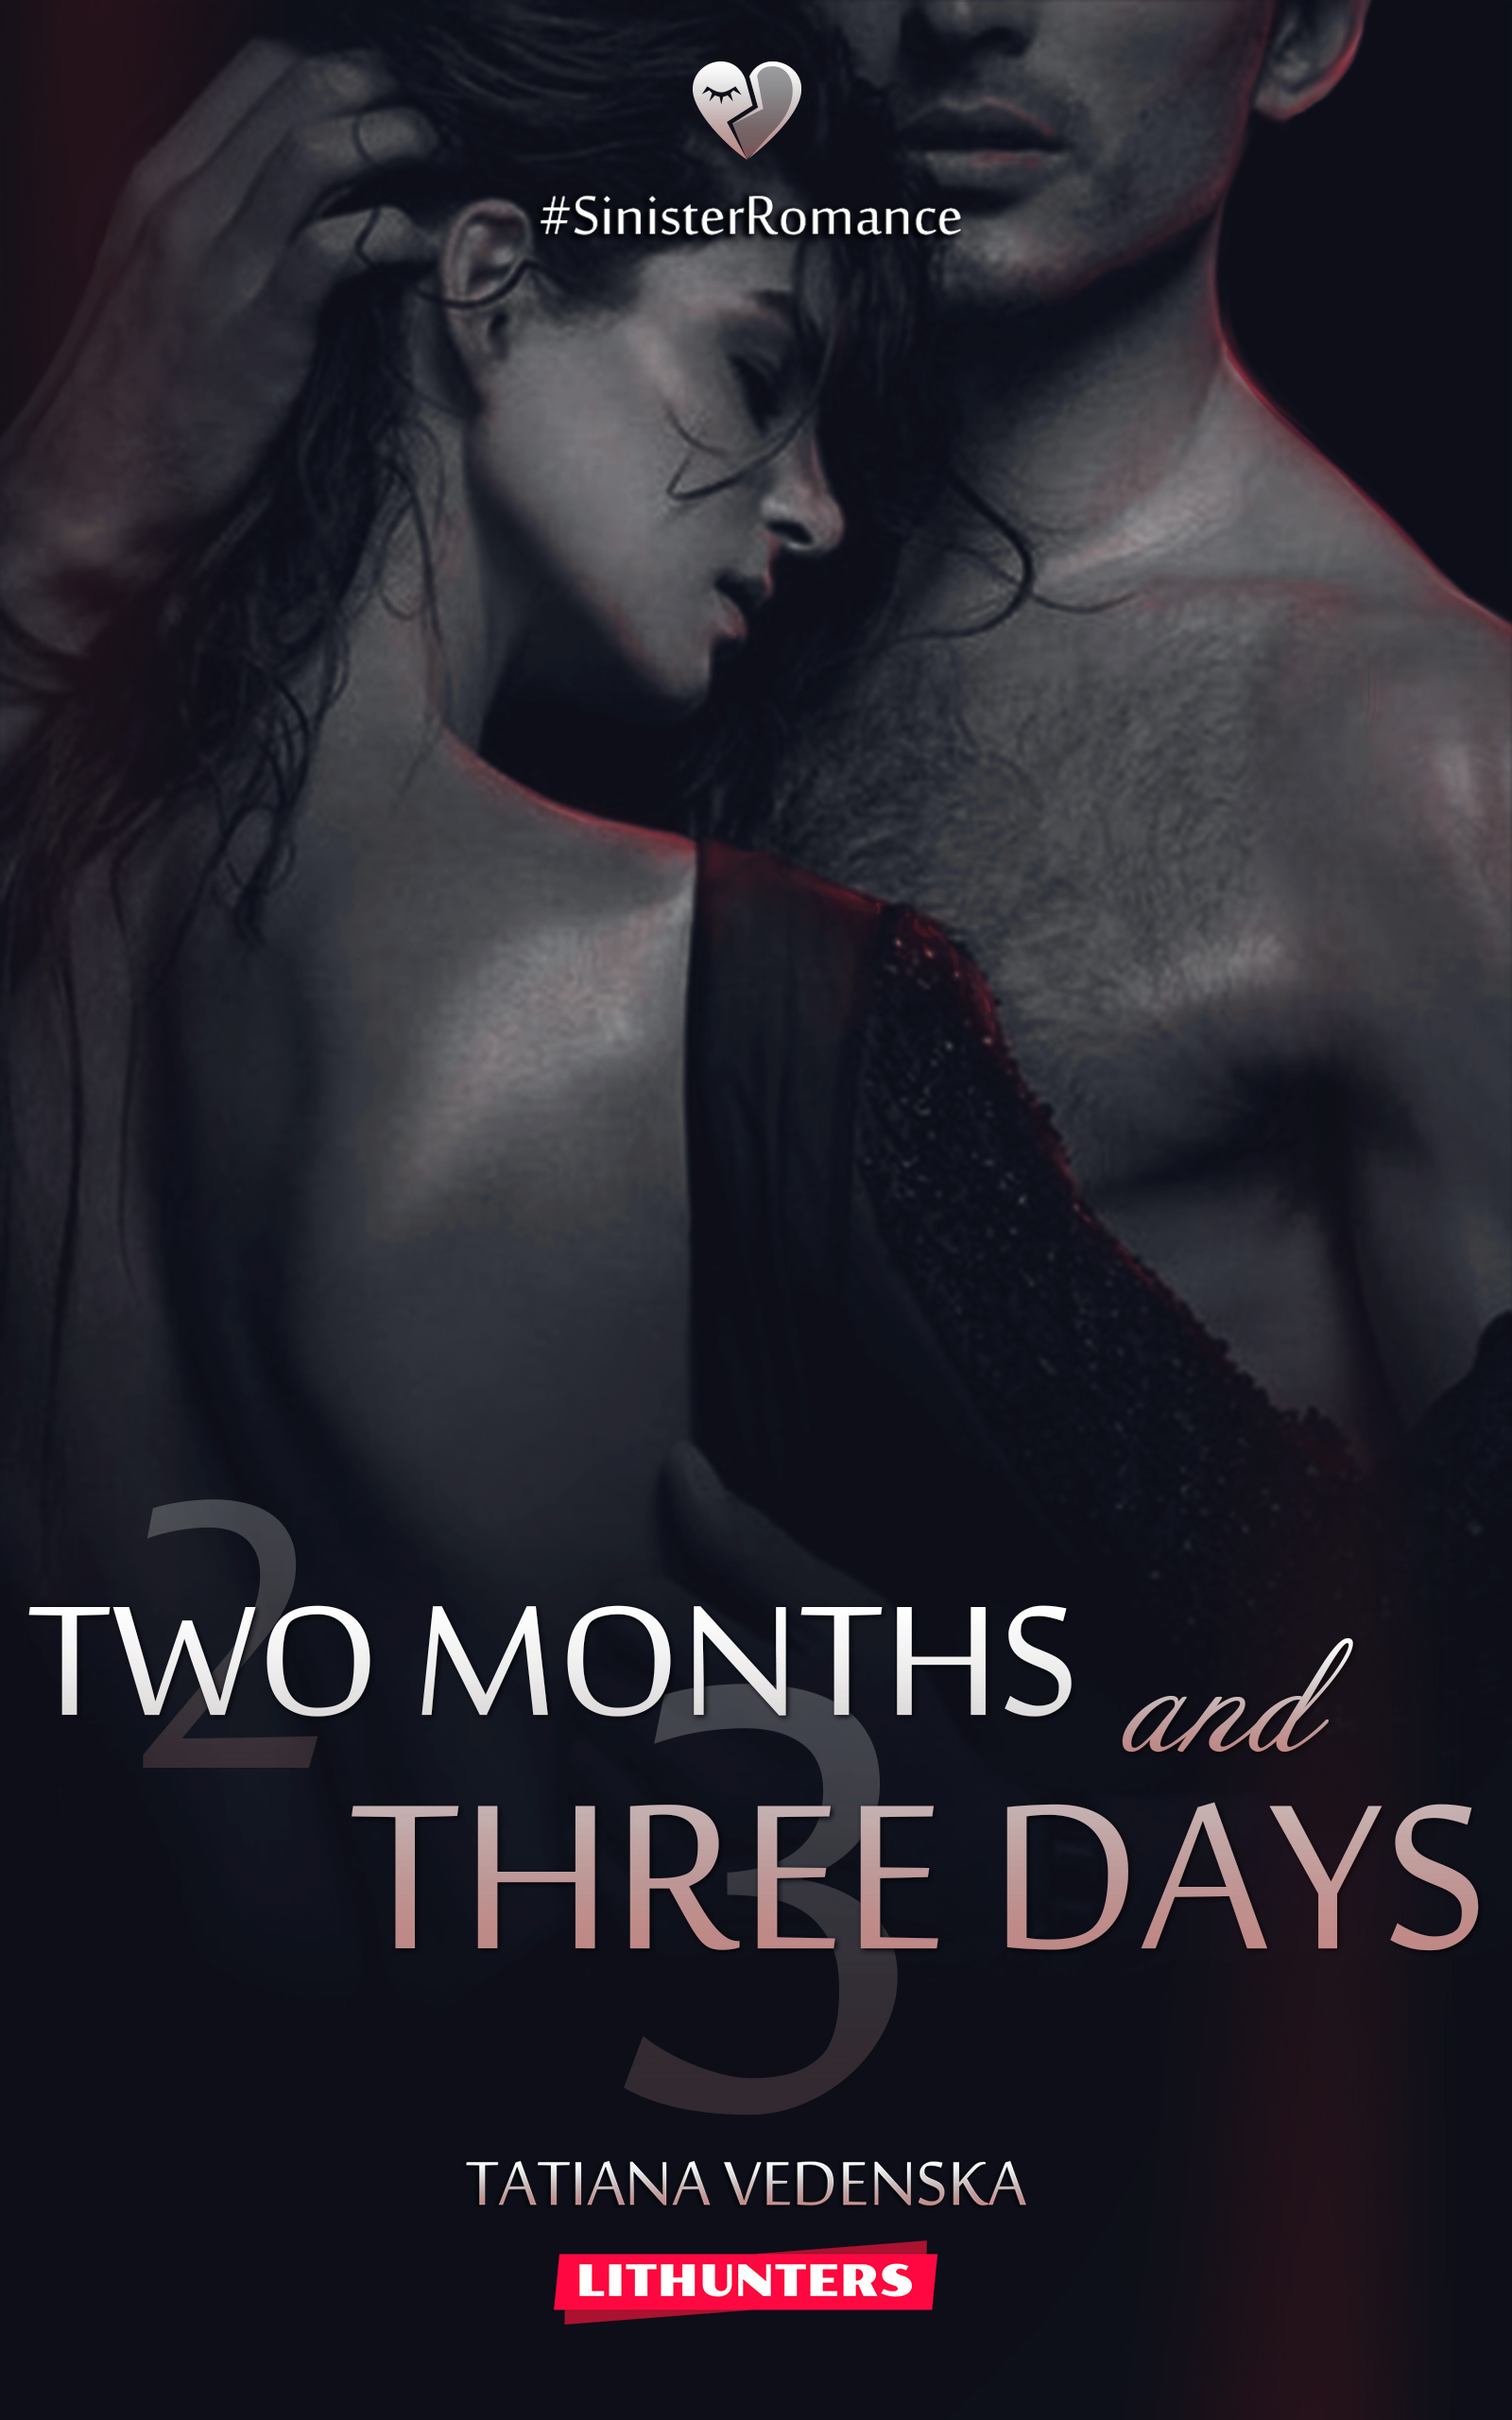 Two Months and Three Days by Tatiana Vedenska